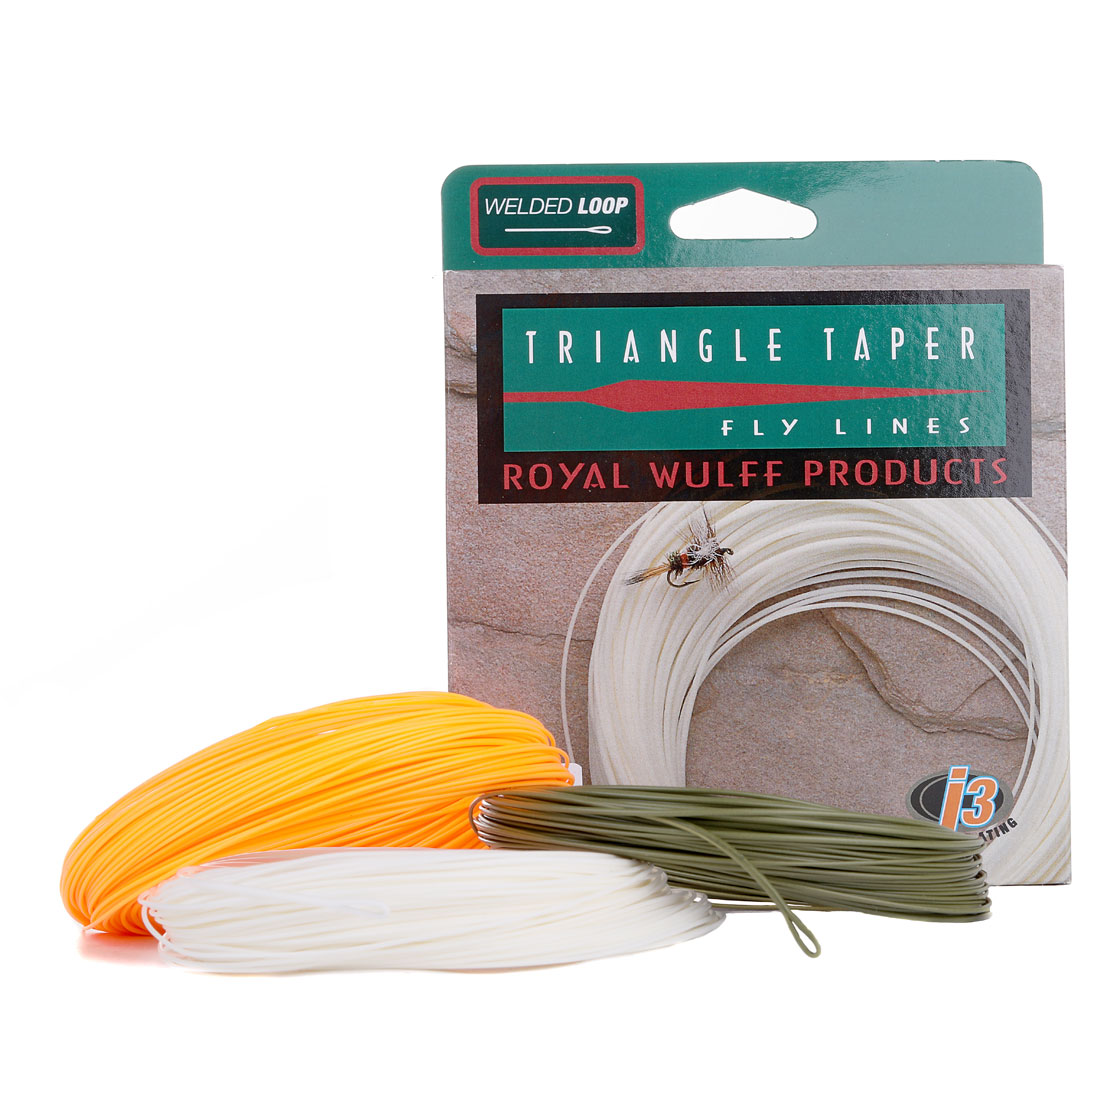 Lee Wulff Triangle Taper J3 Fly Line Floating, WF - Floating, Single-handed, Fly Lines